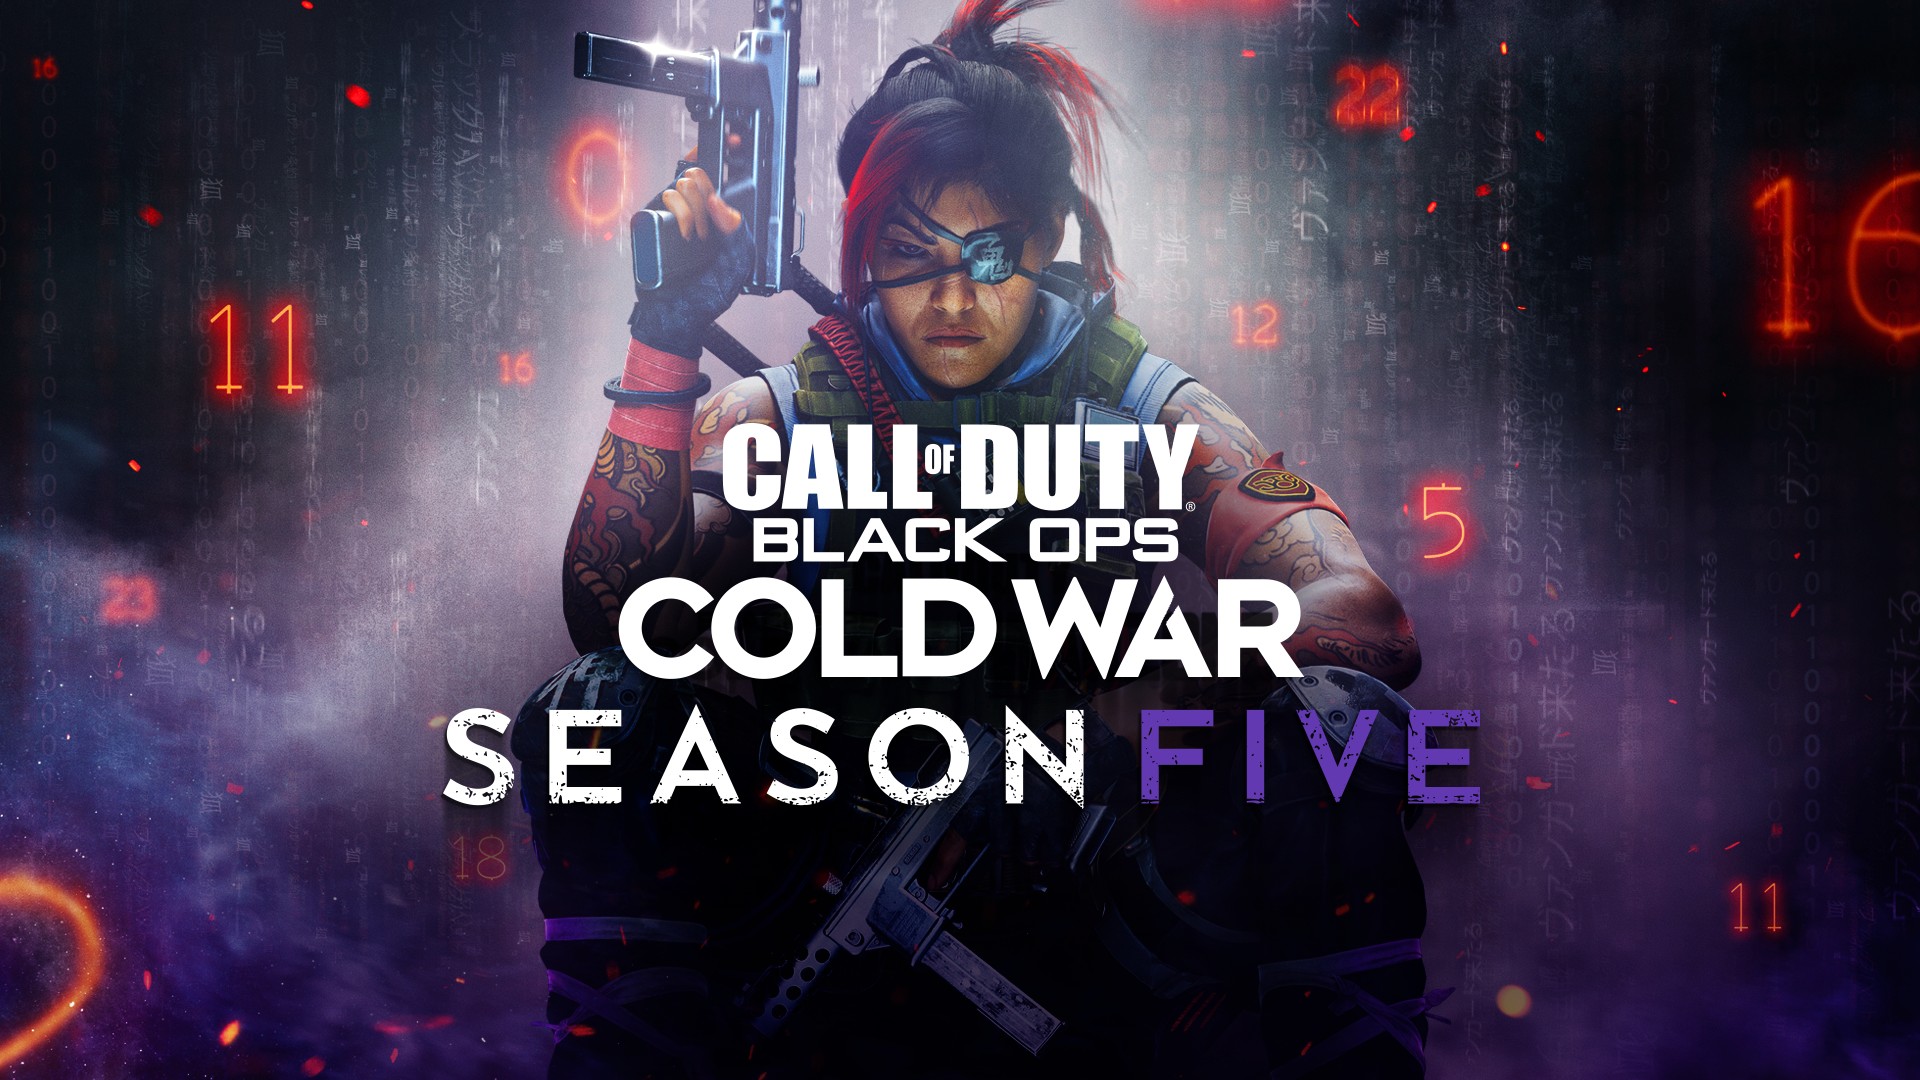 Call of Duty: Black Ops Cold War and Warzone